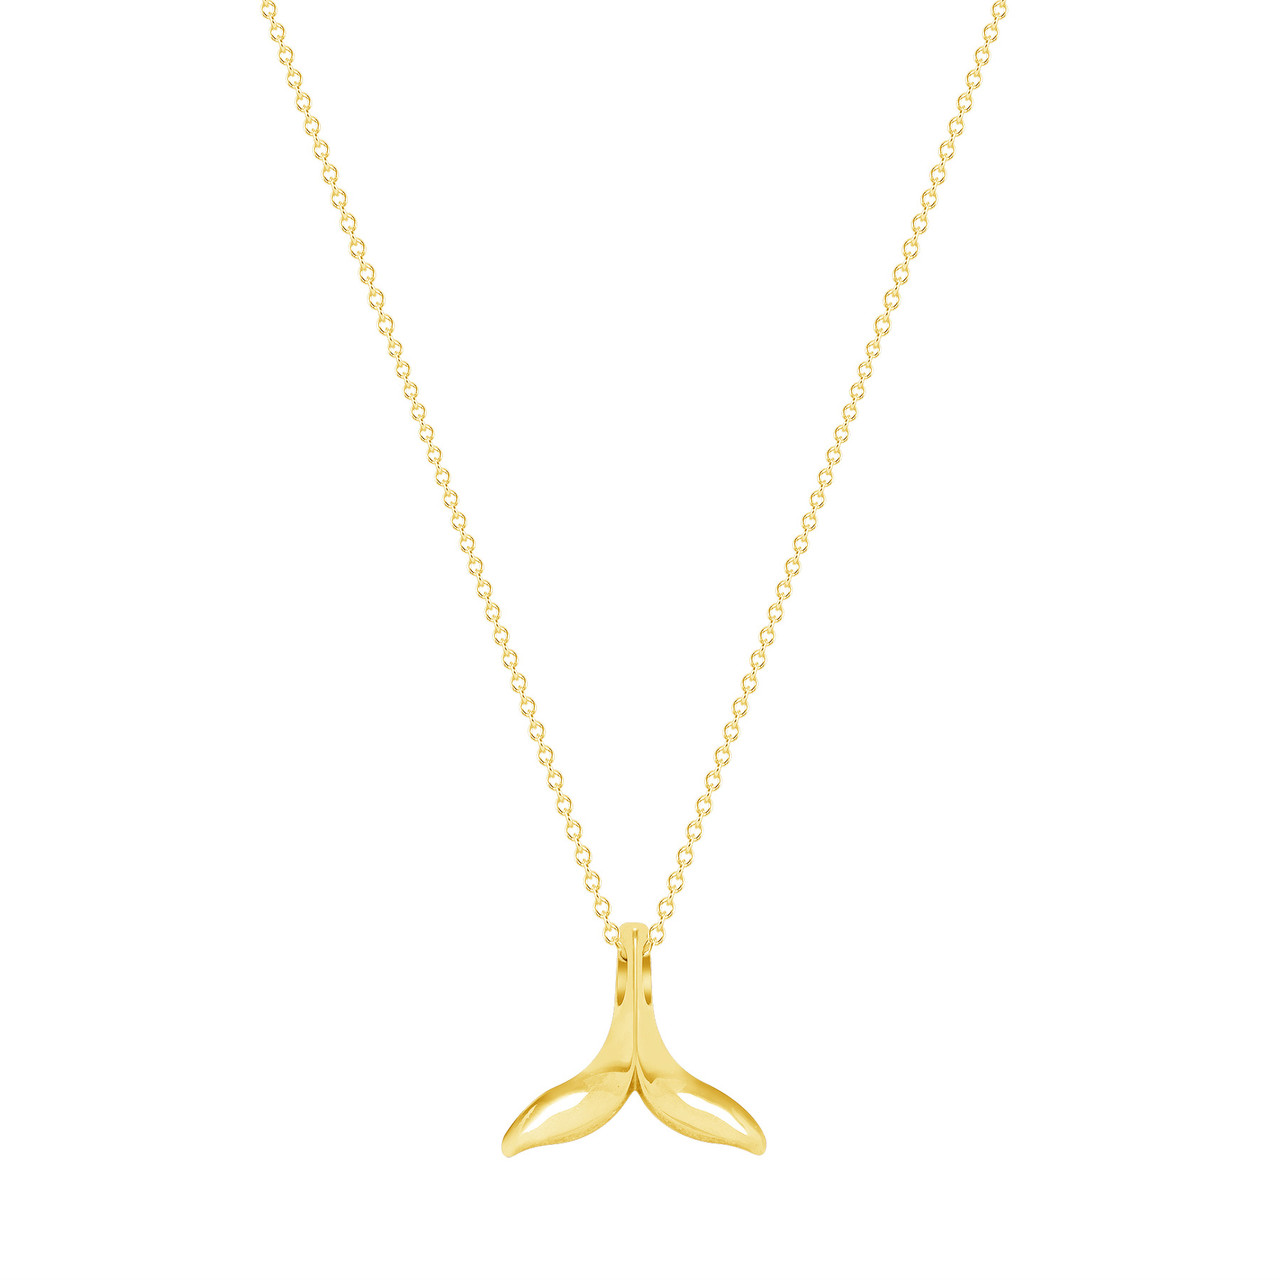 Whale tail necklace. Solid white gold whale fluke design. This piece w –  adrian ashley